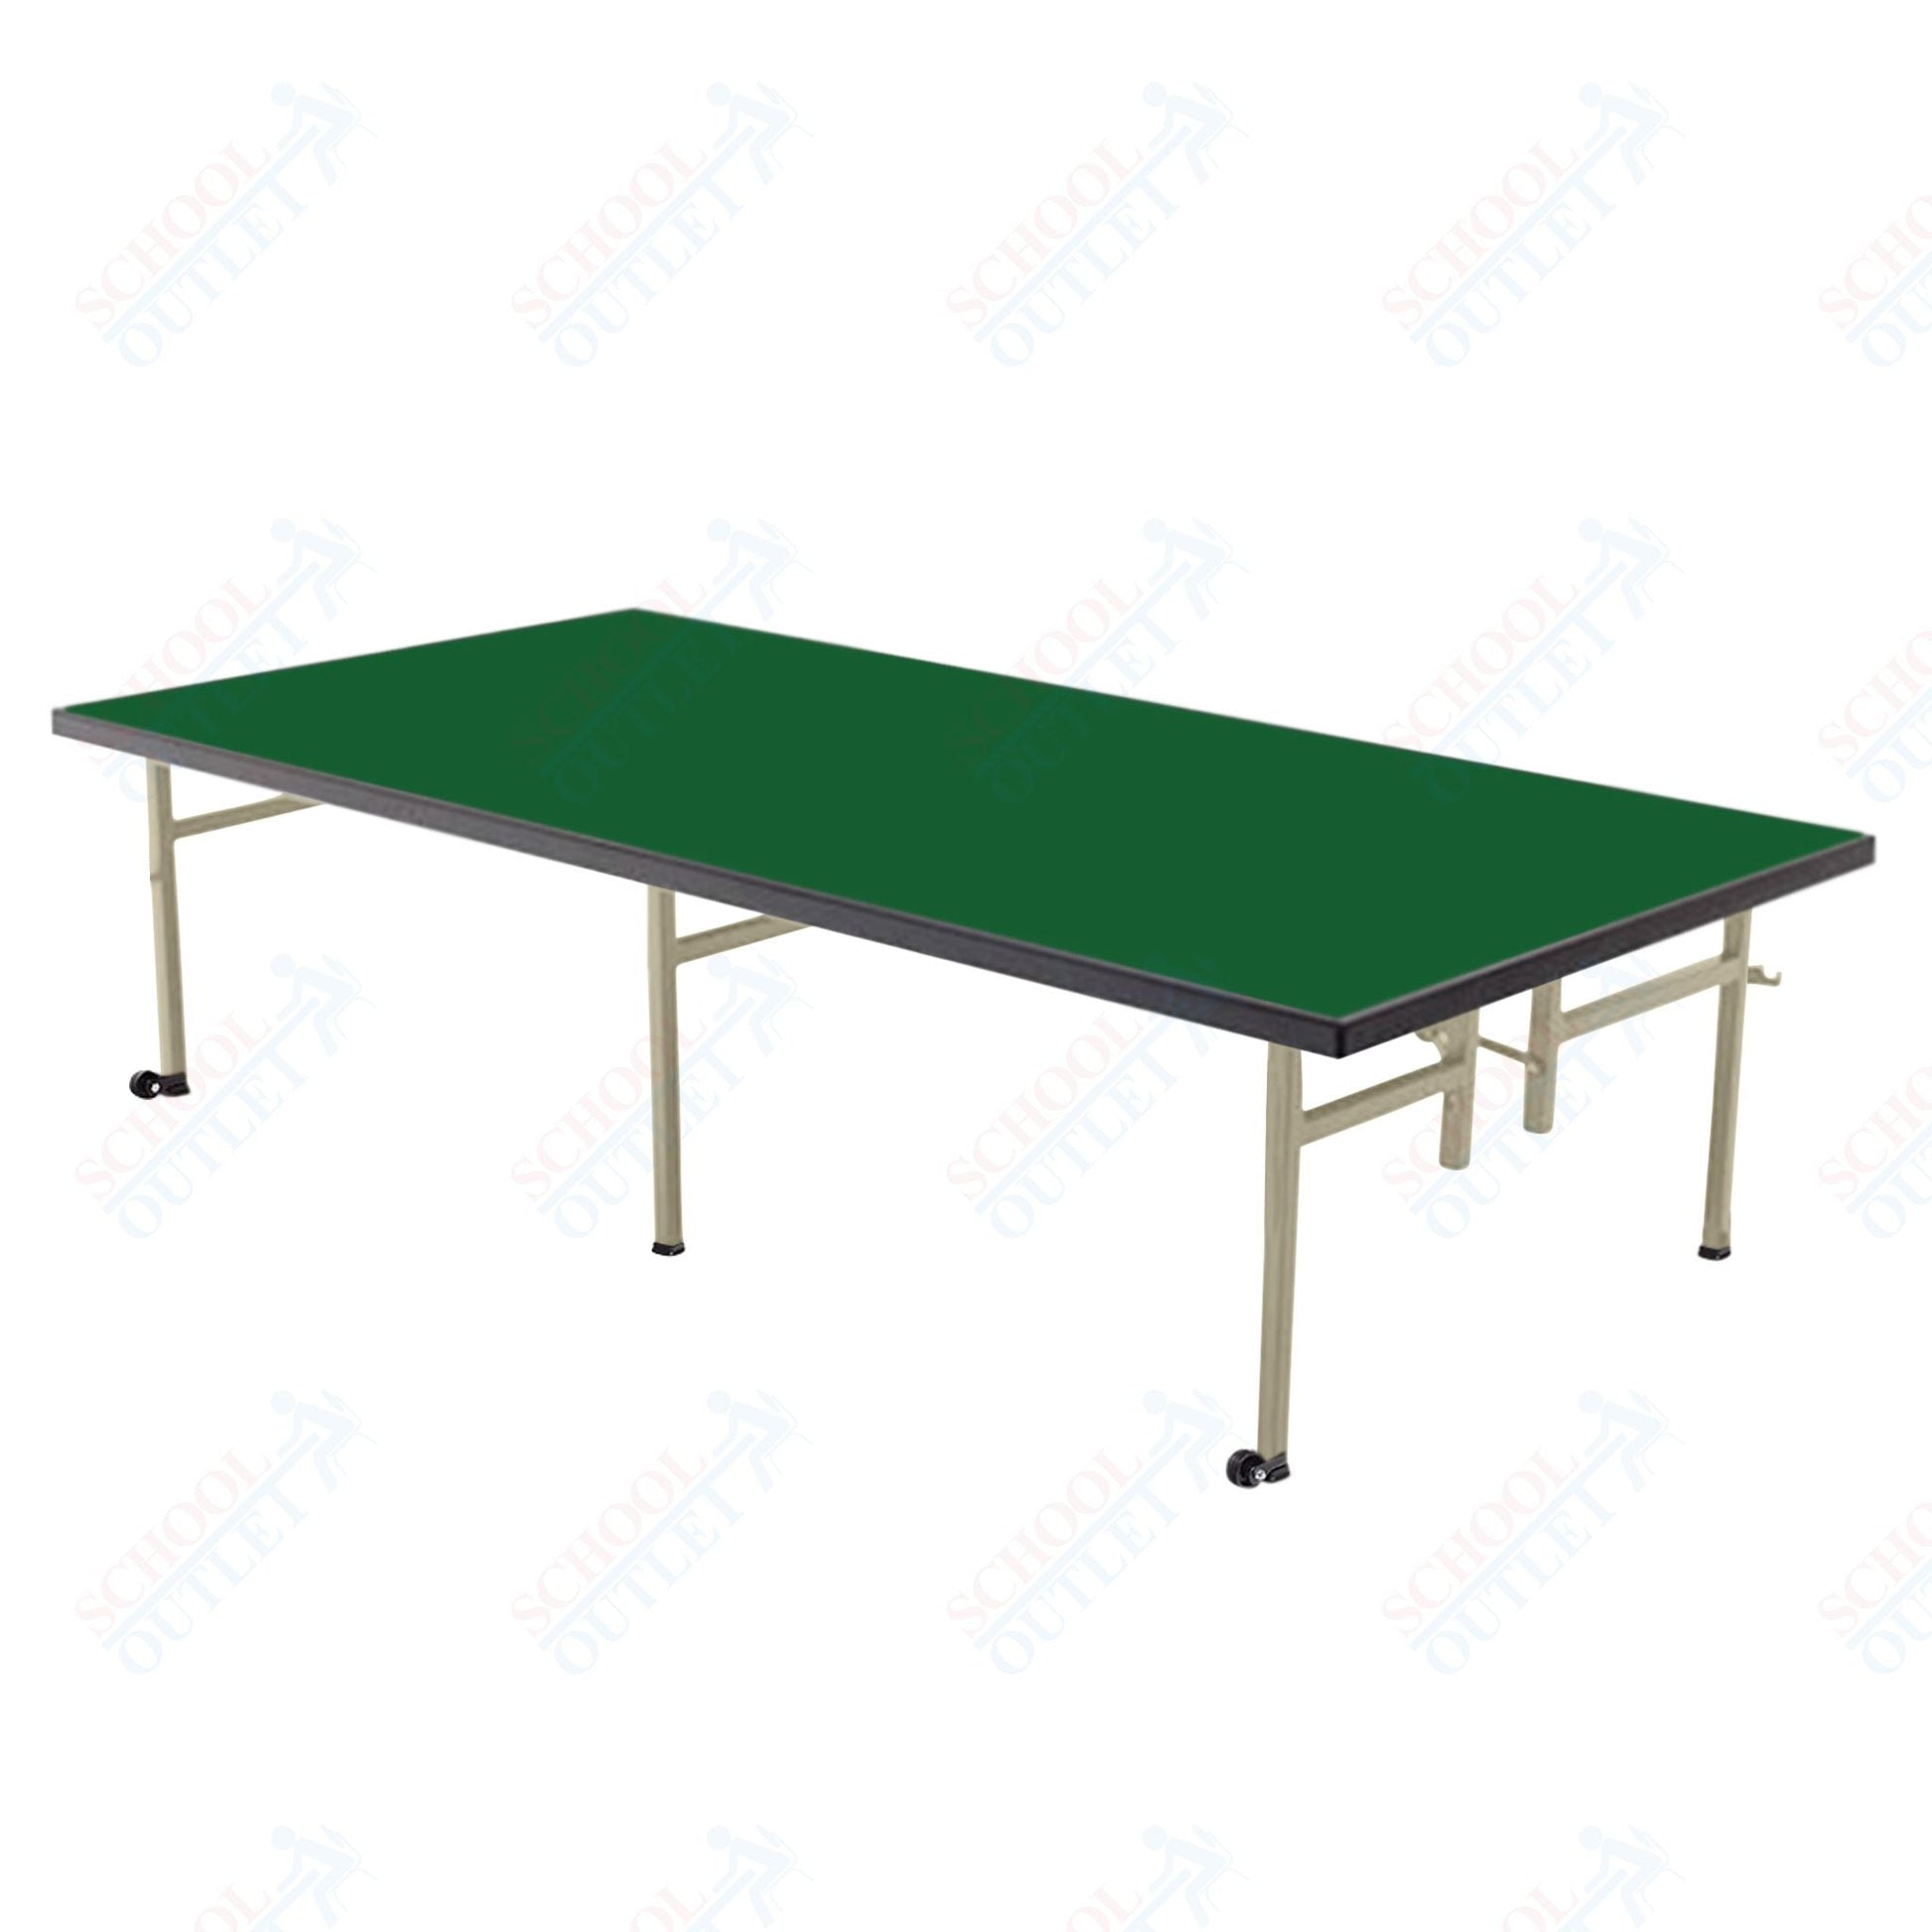 AmTab Fixed Height Stage - Carpet Top - 48"W x 96"L x 24"H (AmTab AMT - ST4824C) - SchoolOutlet